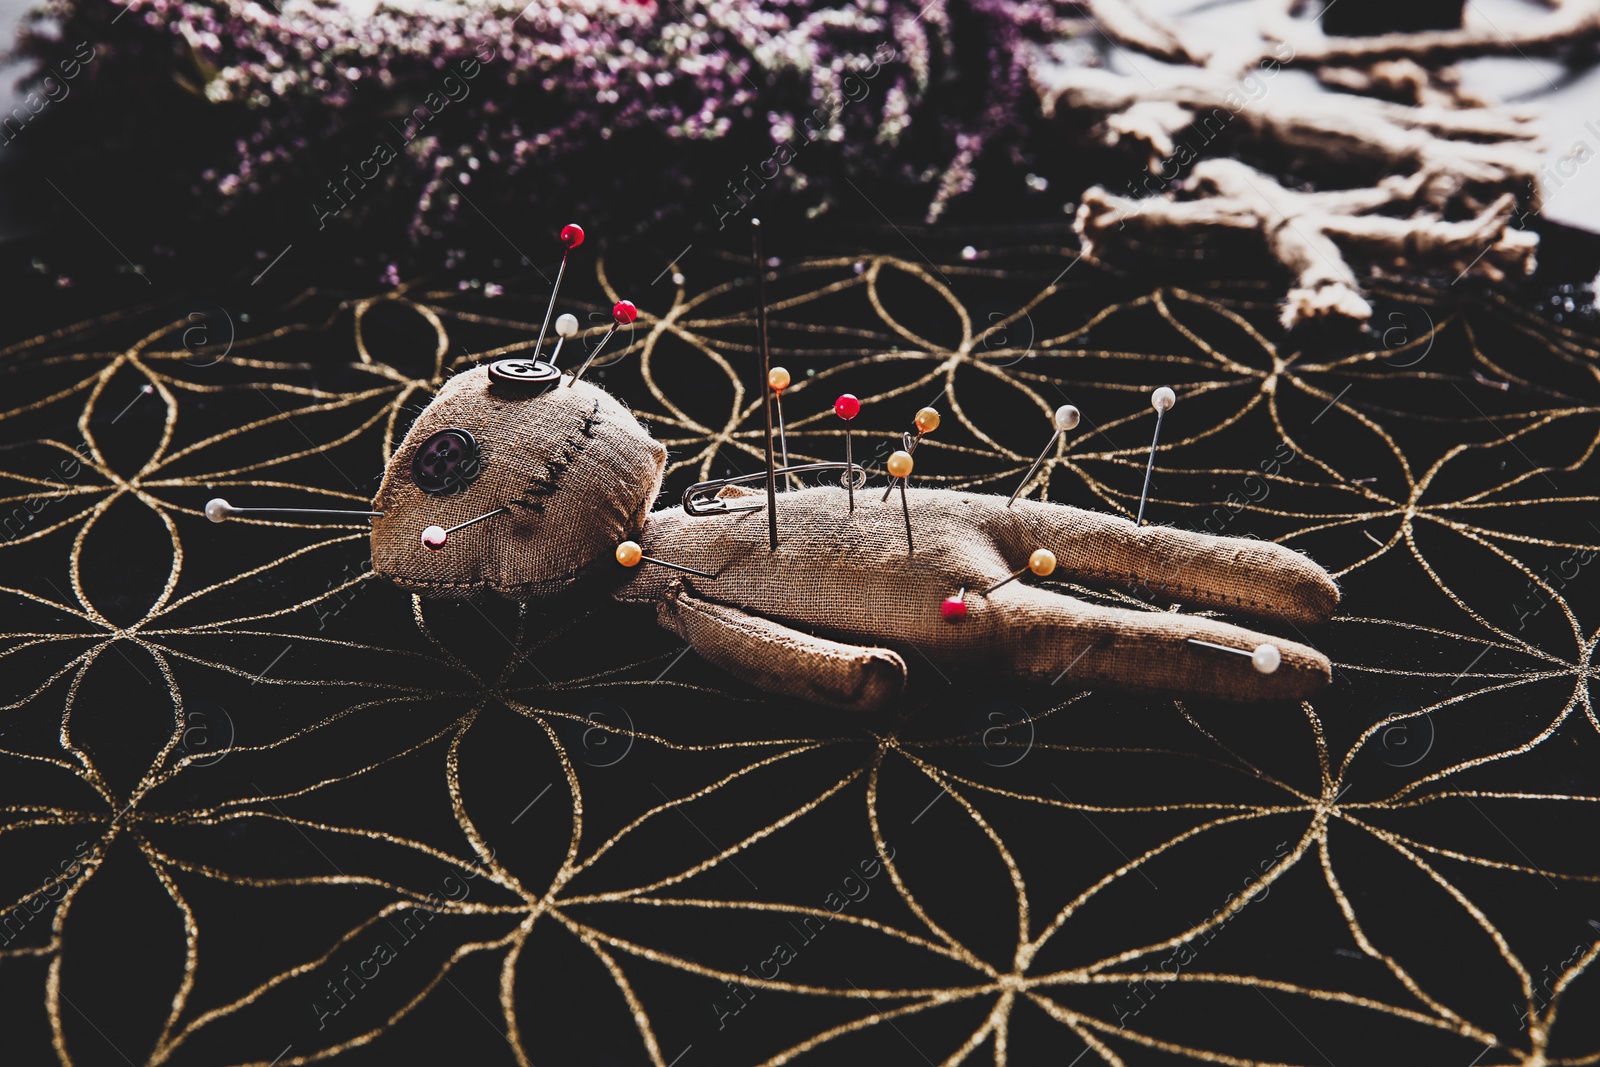 Image of Voodoo doll pierced with pins on table. Curse ceremony